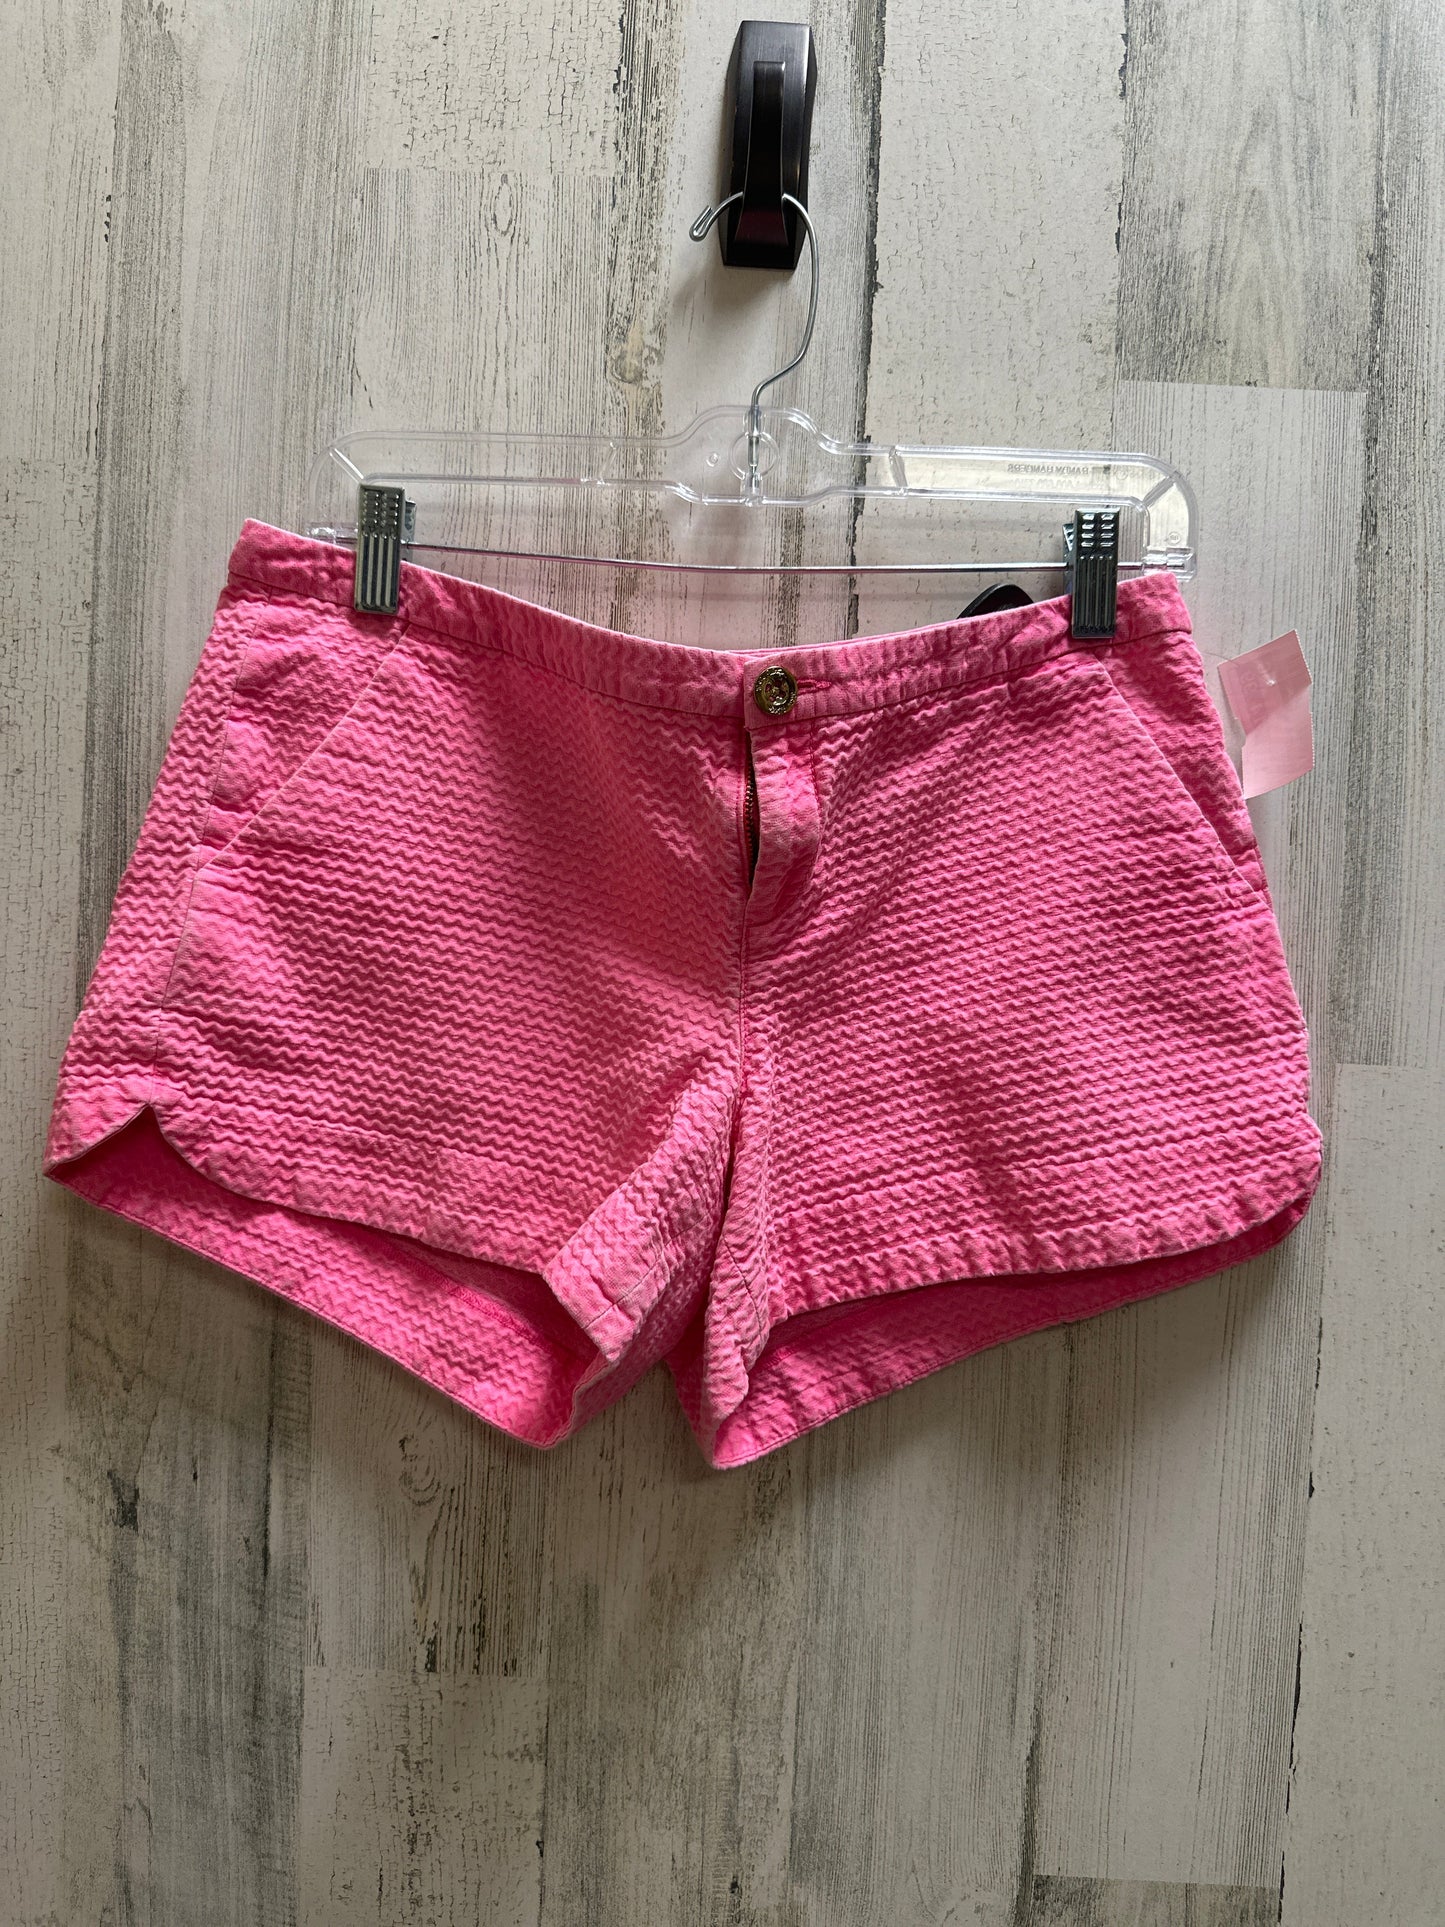 Pink Shorts Lilly Pulitzer, Size 6